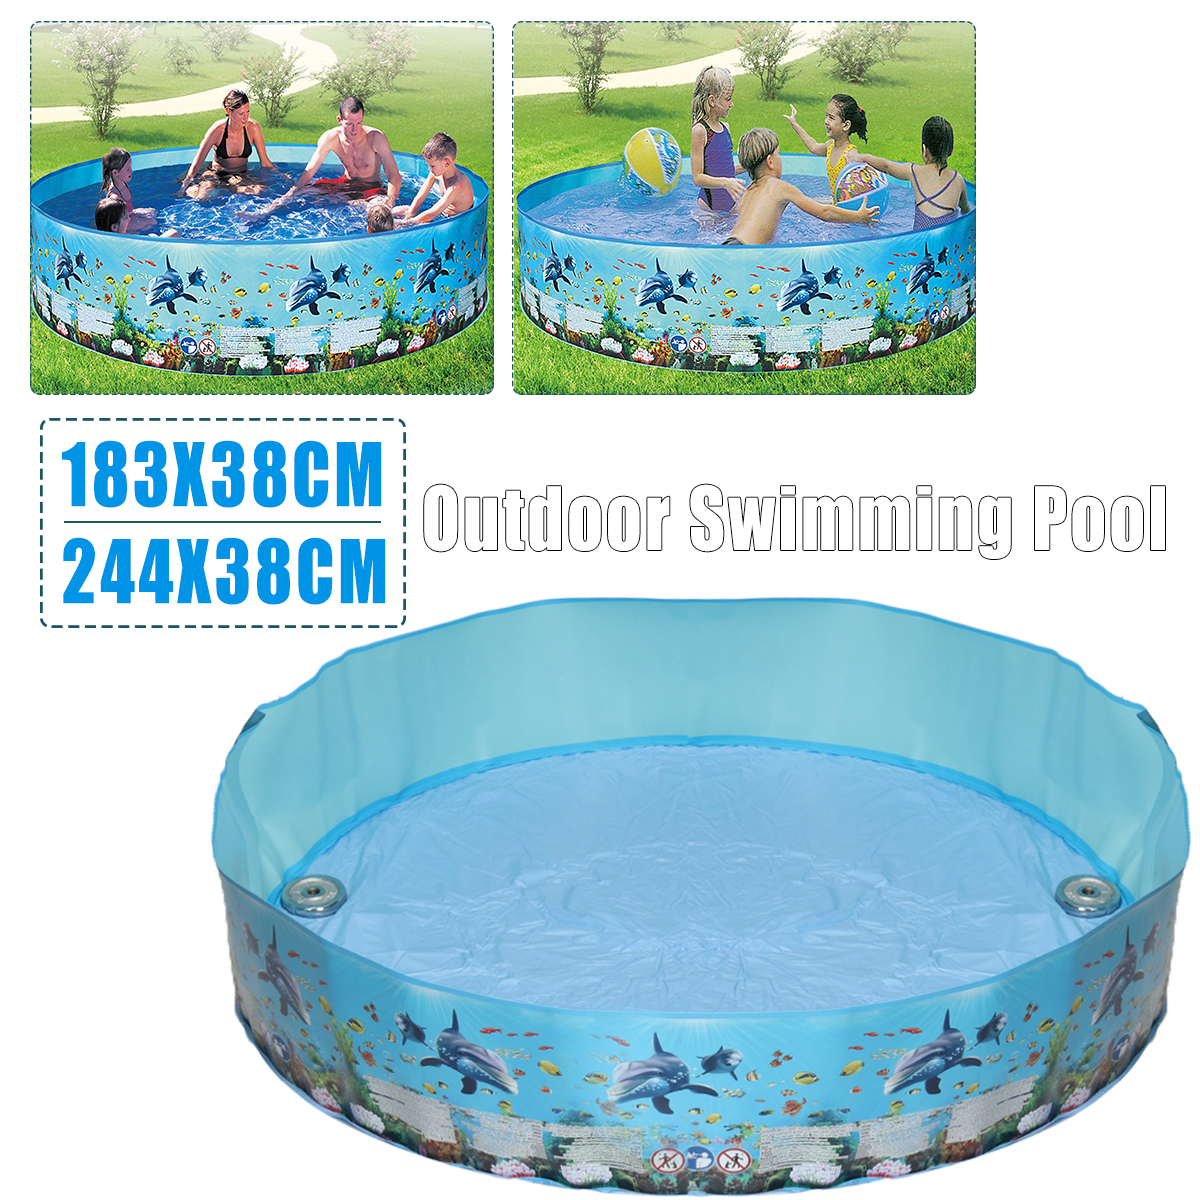 183244cm-Round-Swimming-Pool-Home-Use-Garden-Paddling-Pool-Non-inflatable-Children-Bathing-Tub-Kids--1715065-1